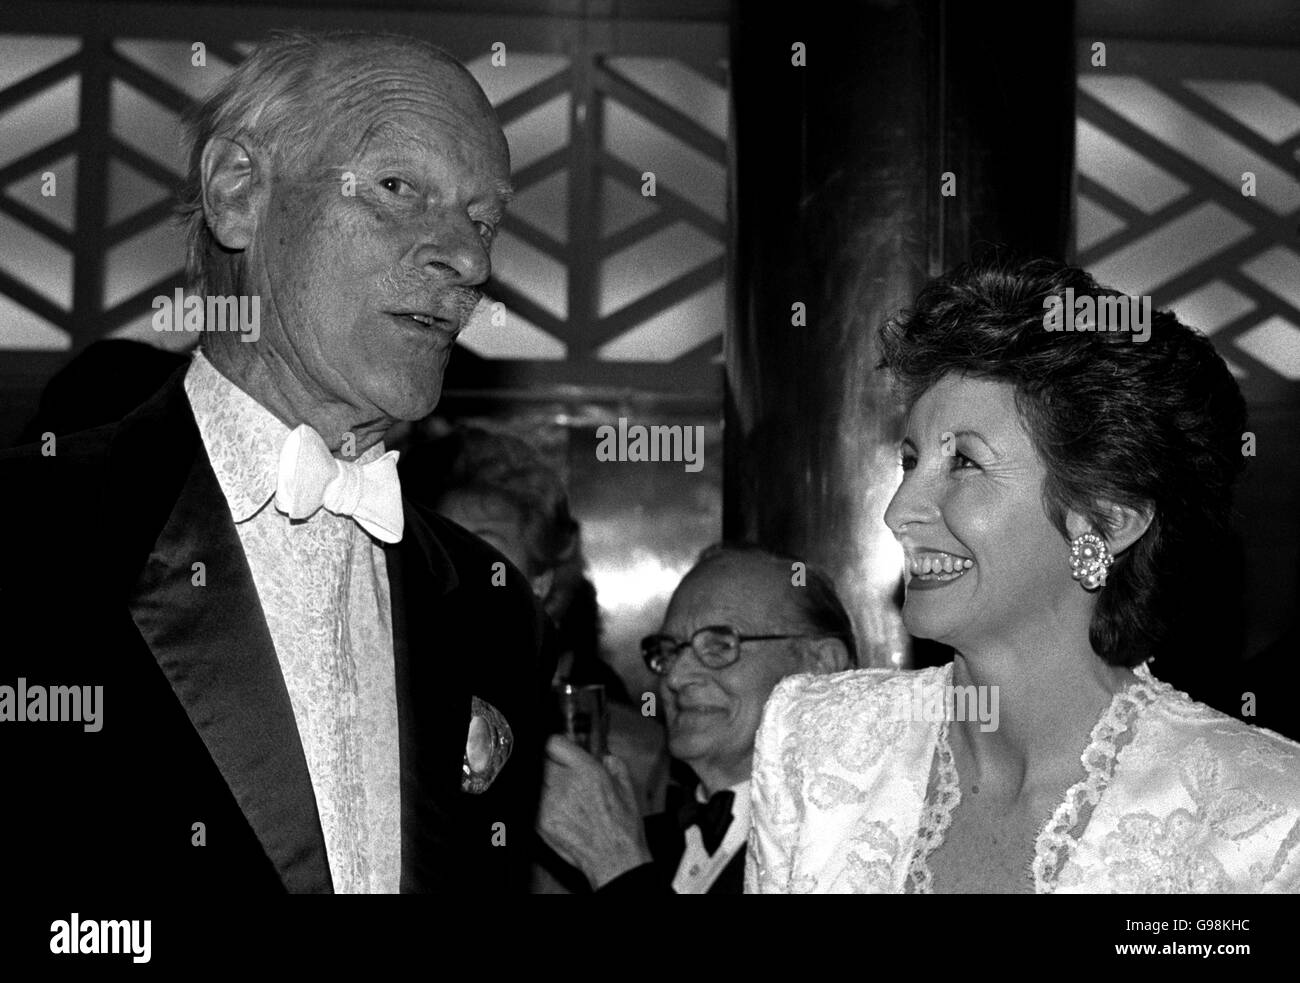 Norman Parkinson draws a smile from television presenter Sue Lawley at a gala dinner. Stock Photo